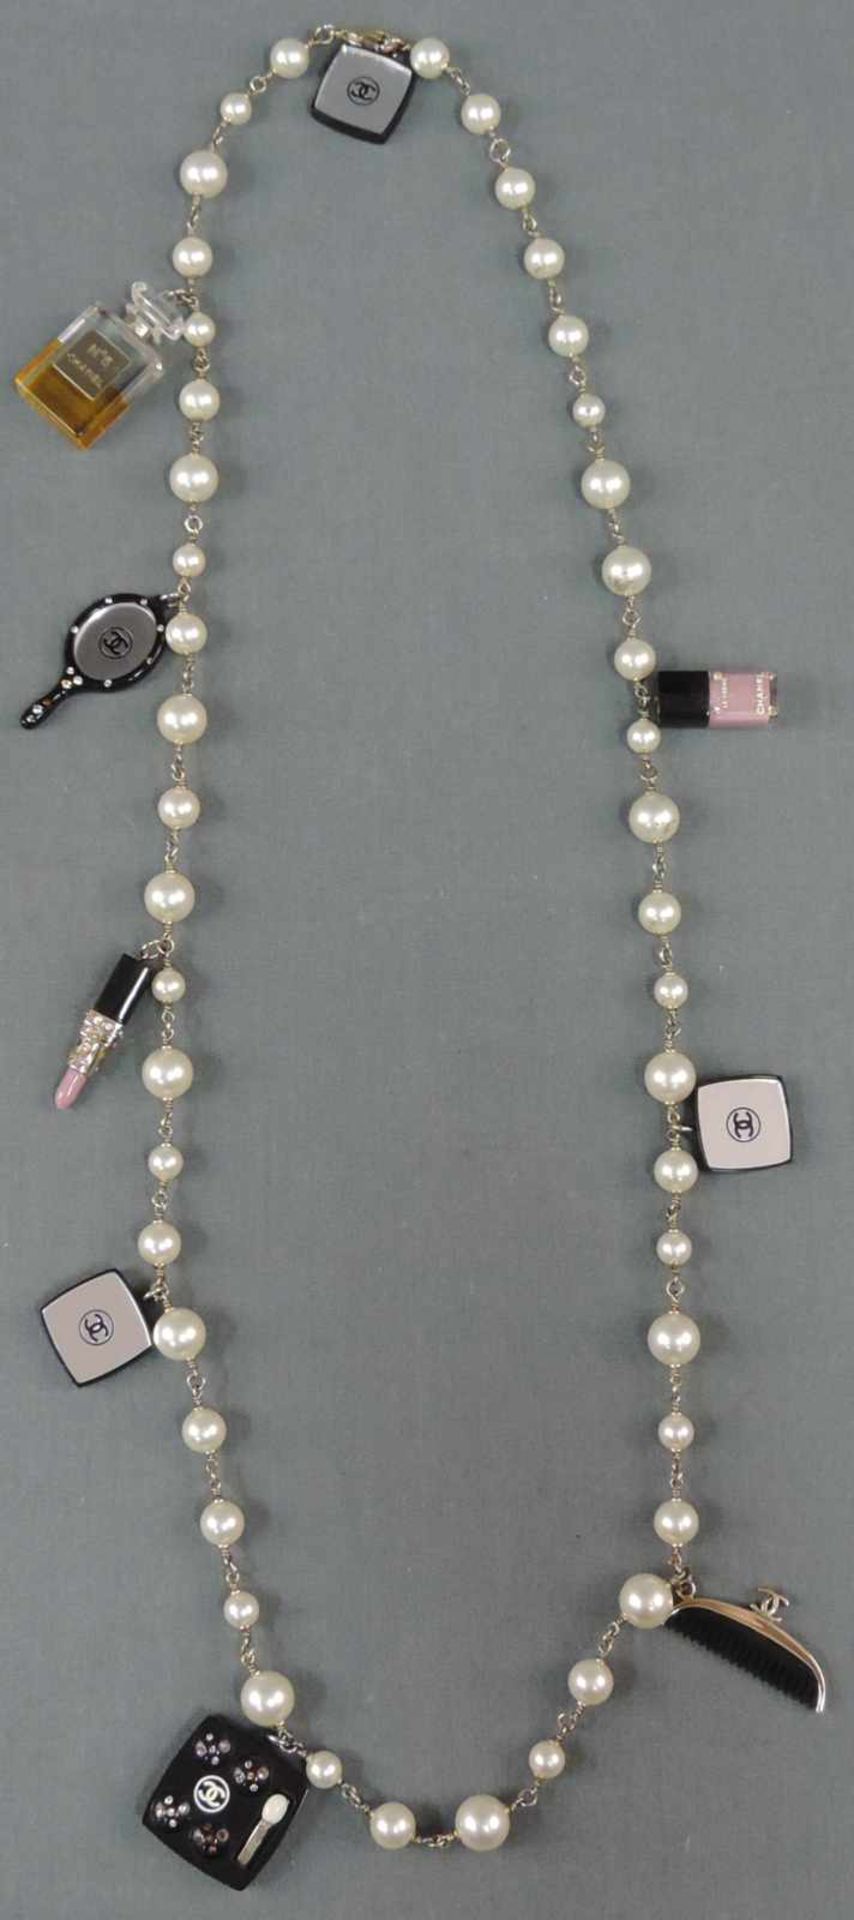 Chanel Kette Modeschmuck. Offen circa 100 cm lang. Chanel necklace, fashion jewelry. Open about